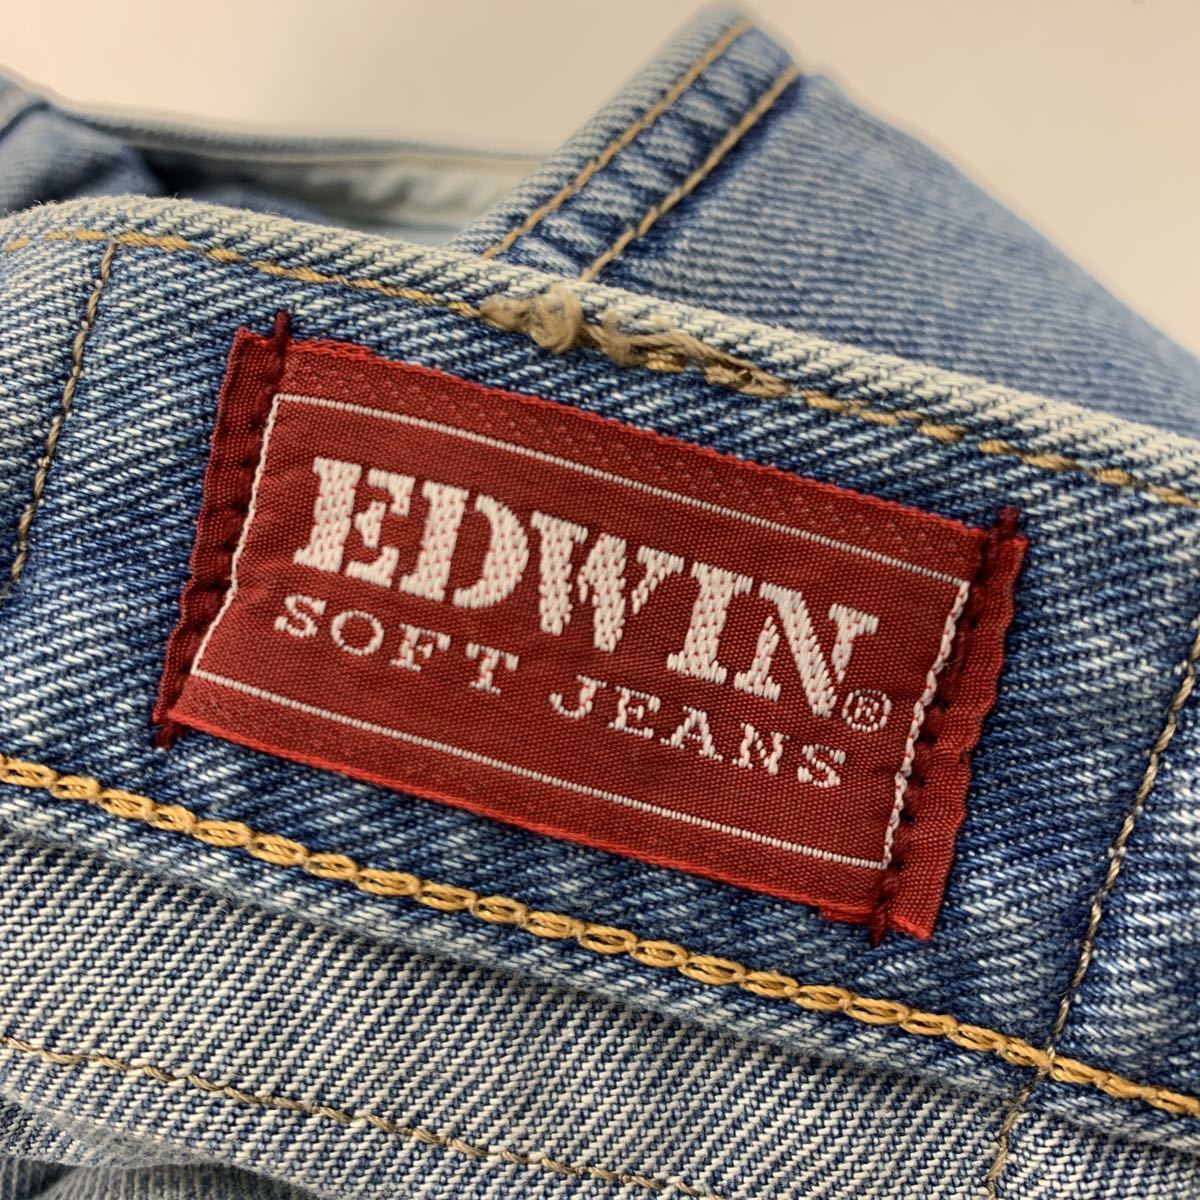  Edwin * EDWIN 1703 703 Denim pants jeans W46 extra-large big size ice blue American Casual standard . road old clothes style!#Ja3633